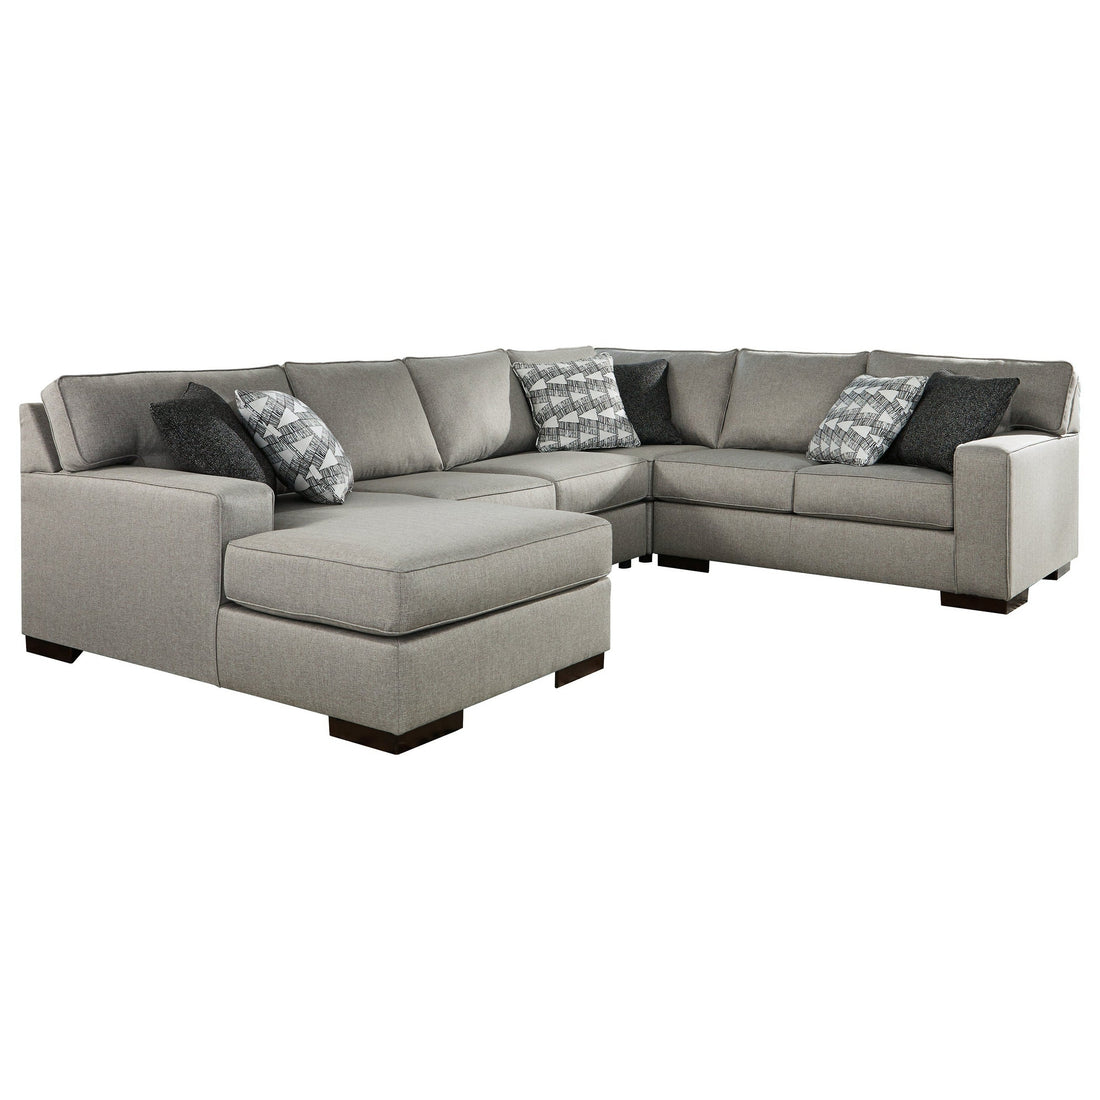 Marsing Nuvella 4-Piece Sectional with Chaise Ash-41902S5